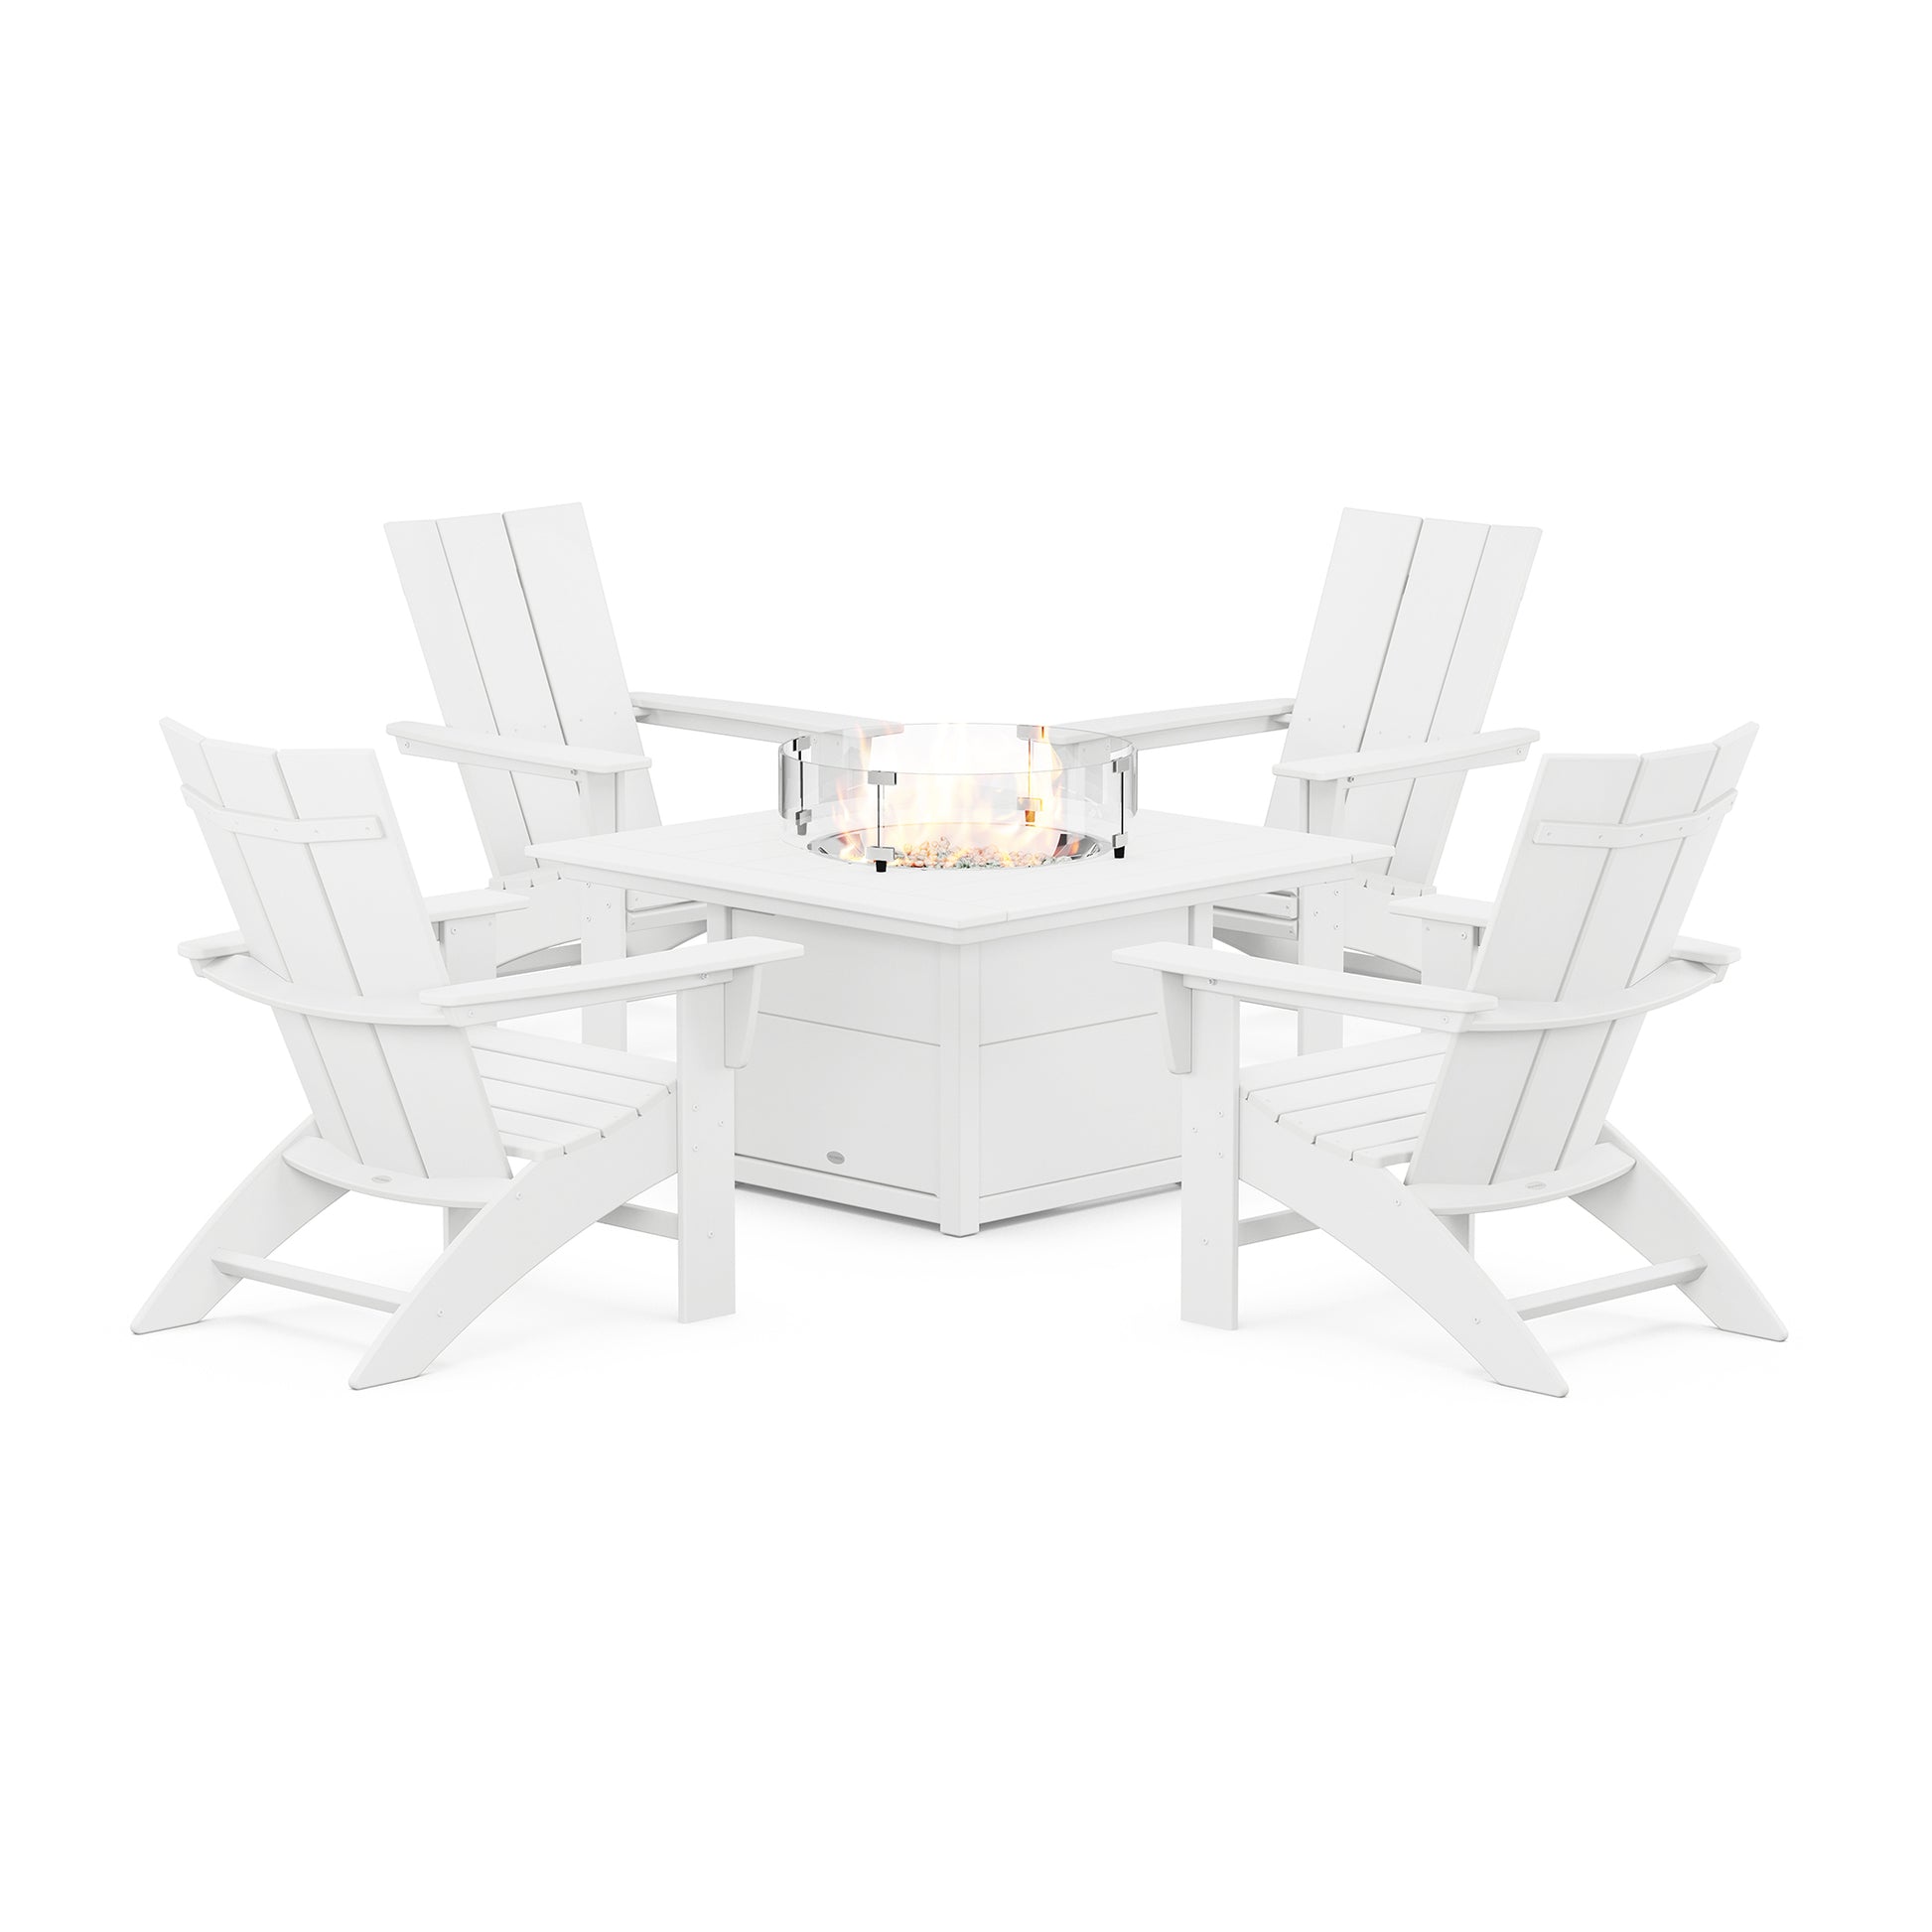 Five white POLYWOOD Modern Curveback Adirondack Chairs arranged around a hexagonal outdoor fire pit table with a lit fire, set against a plain white background.